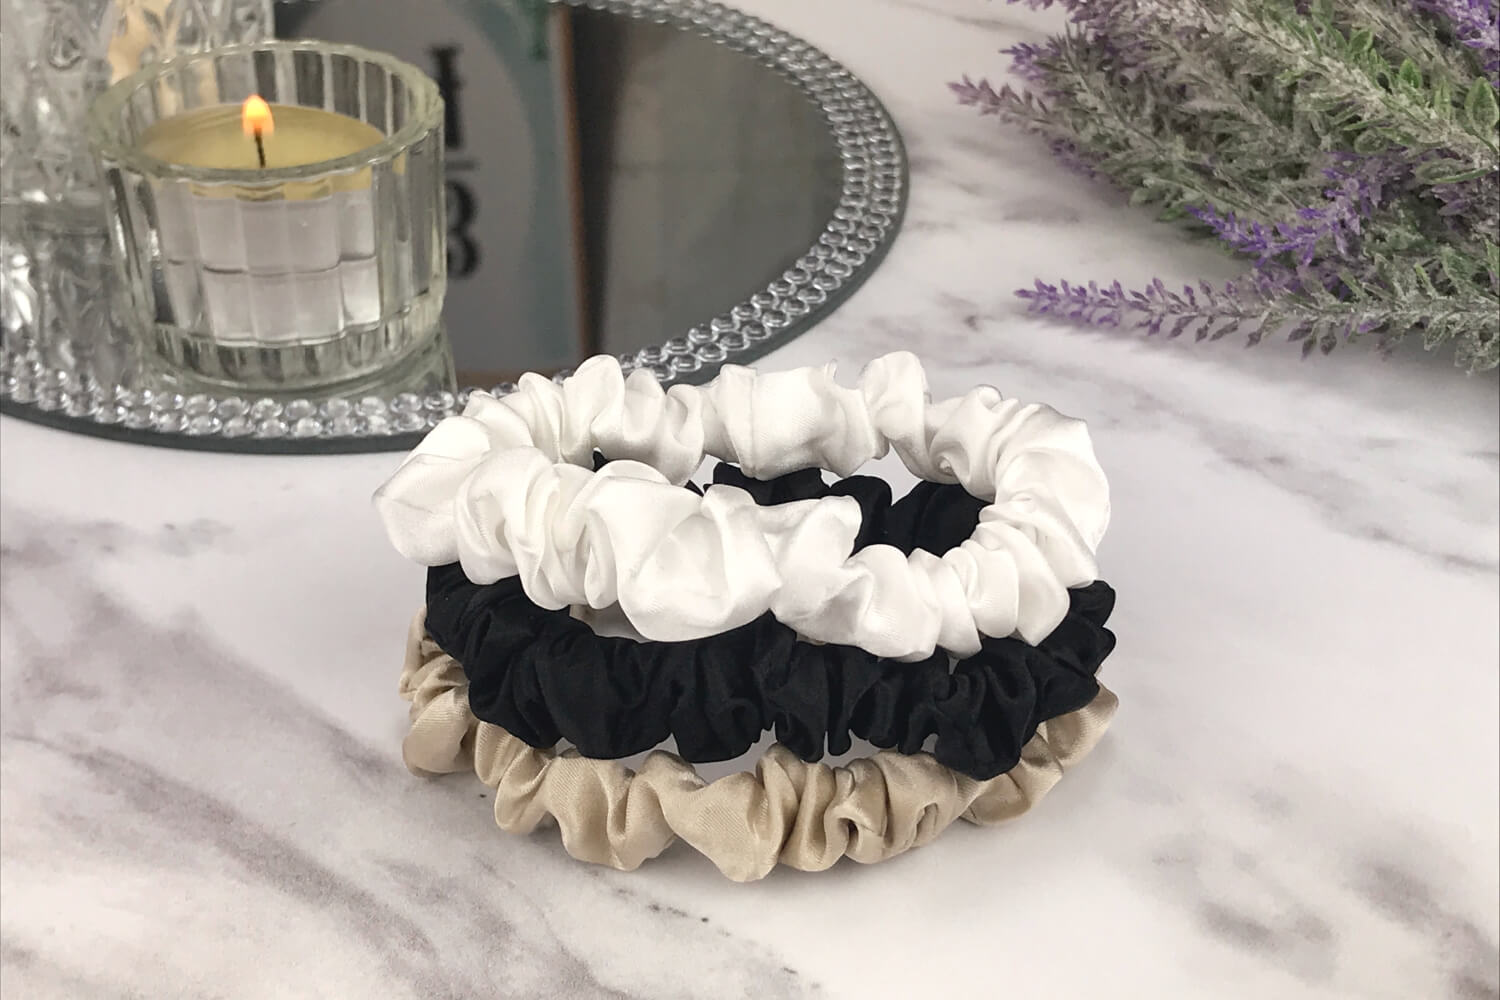 Celestial Silk skinny taupe ivory and black silk scrunchies stacked on marble counter with lavender plant and a candle in the background